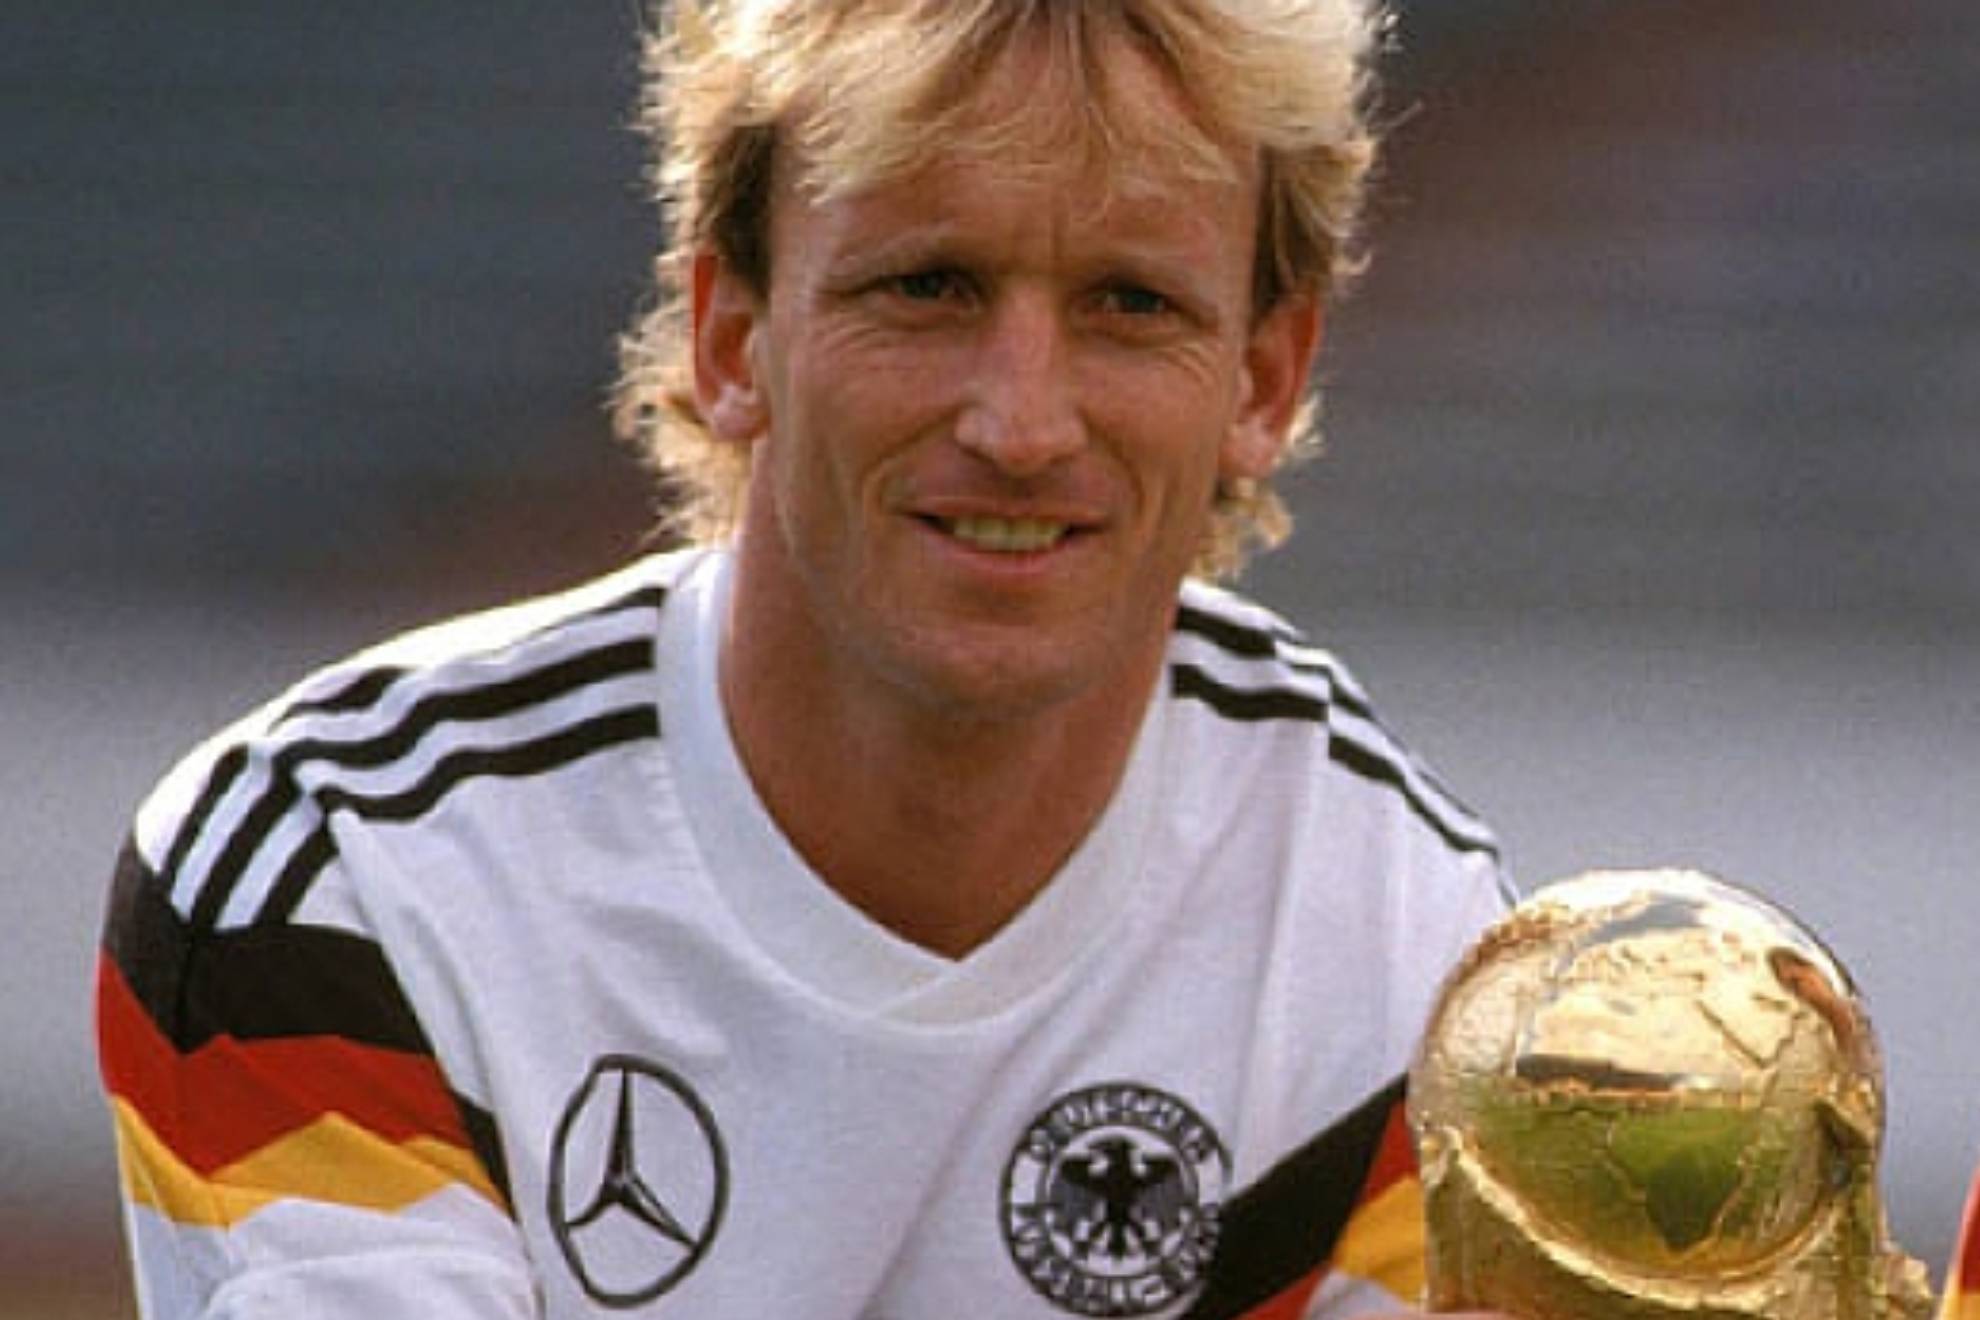 Andreas Brehme cause of death: What we know about the German world champion and his untimely passing as tributes pour in